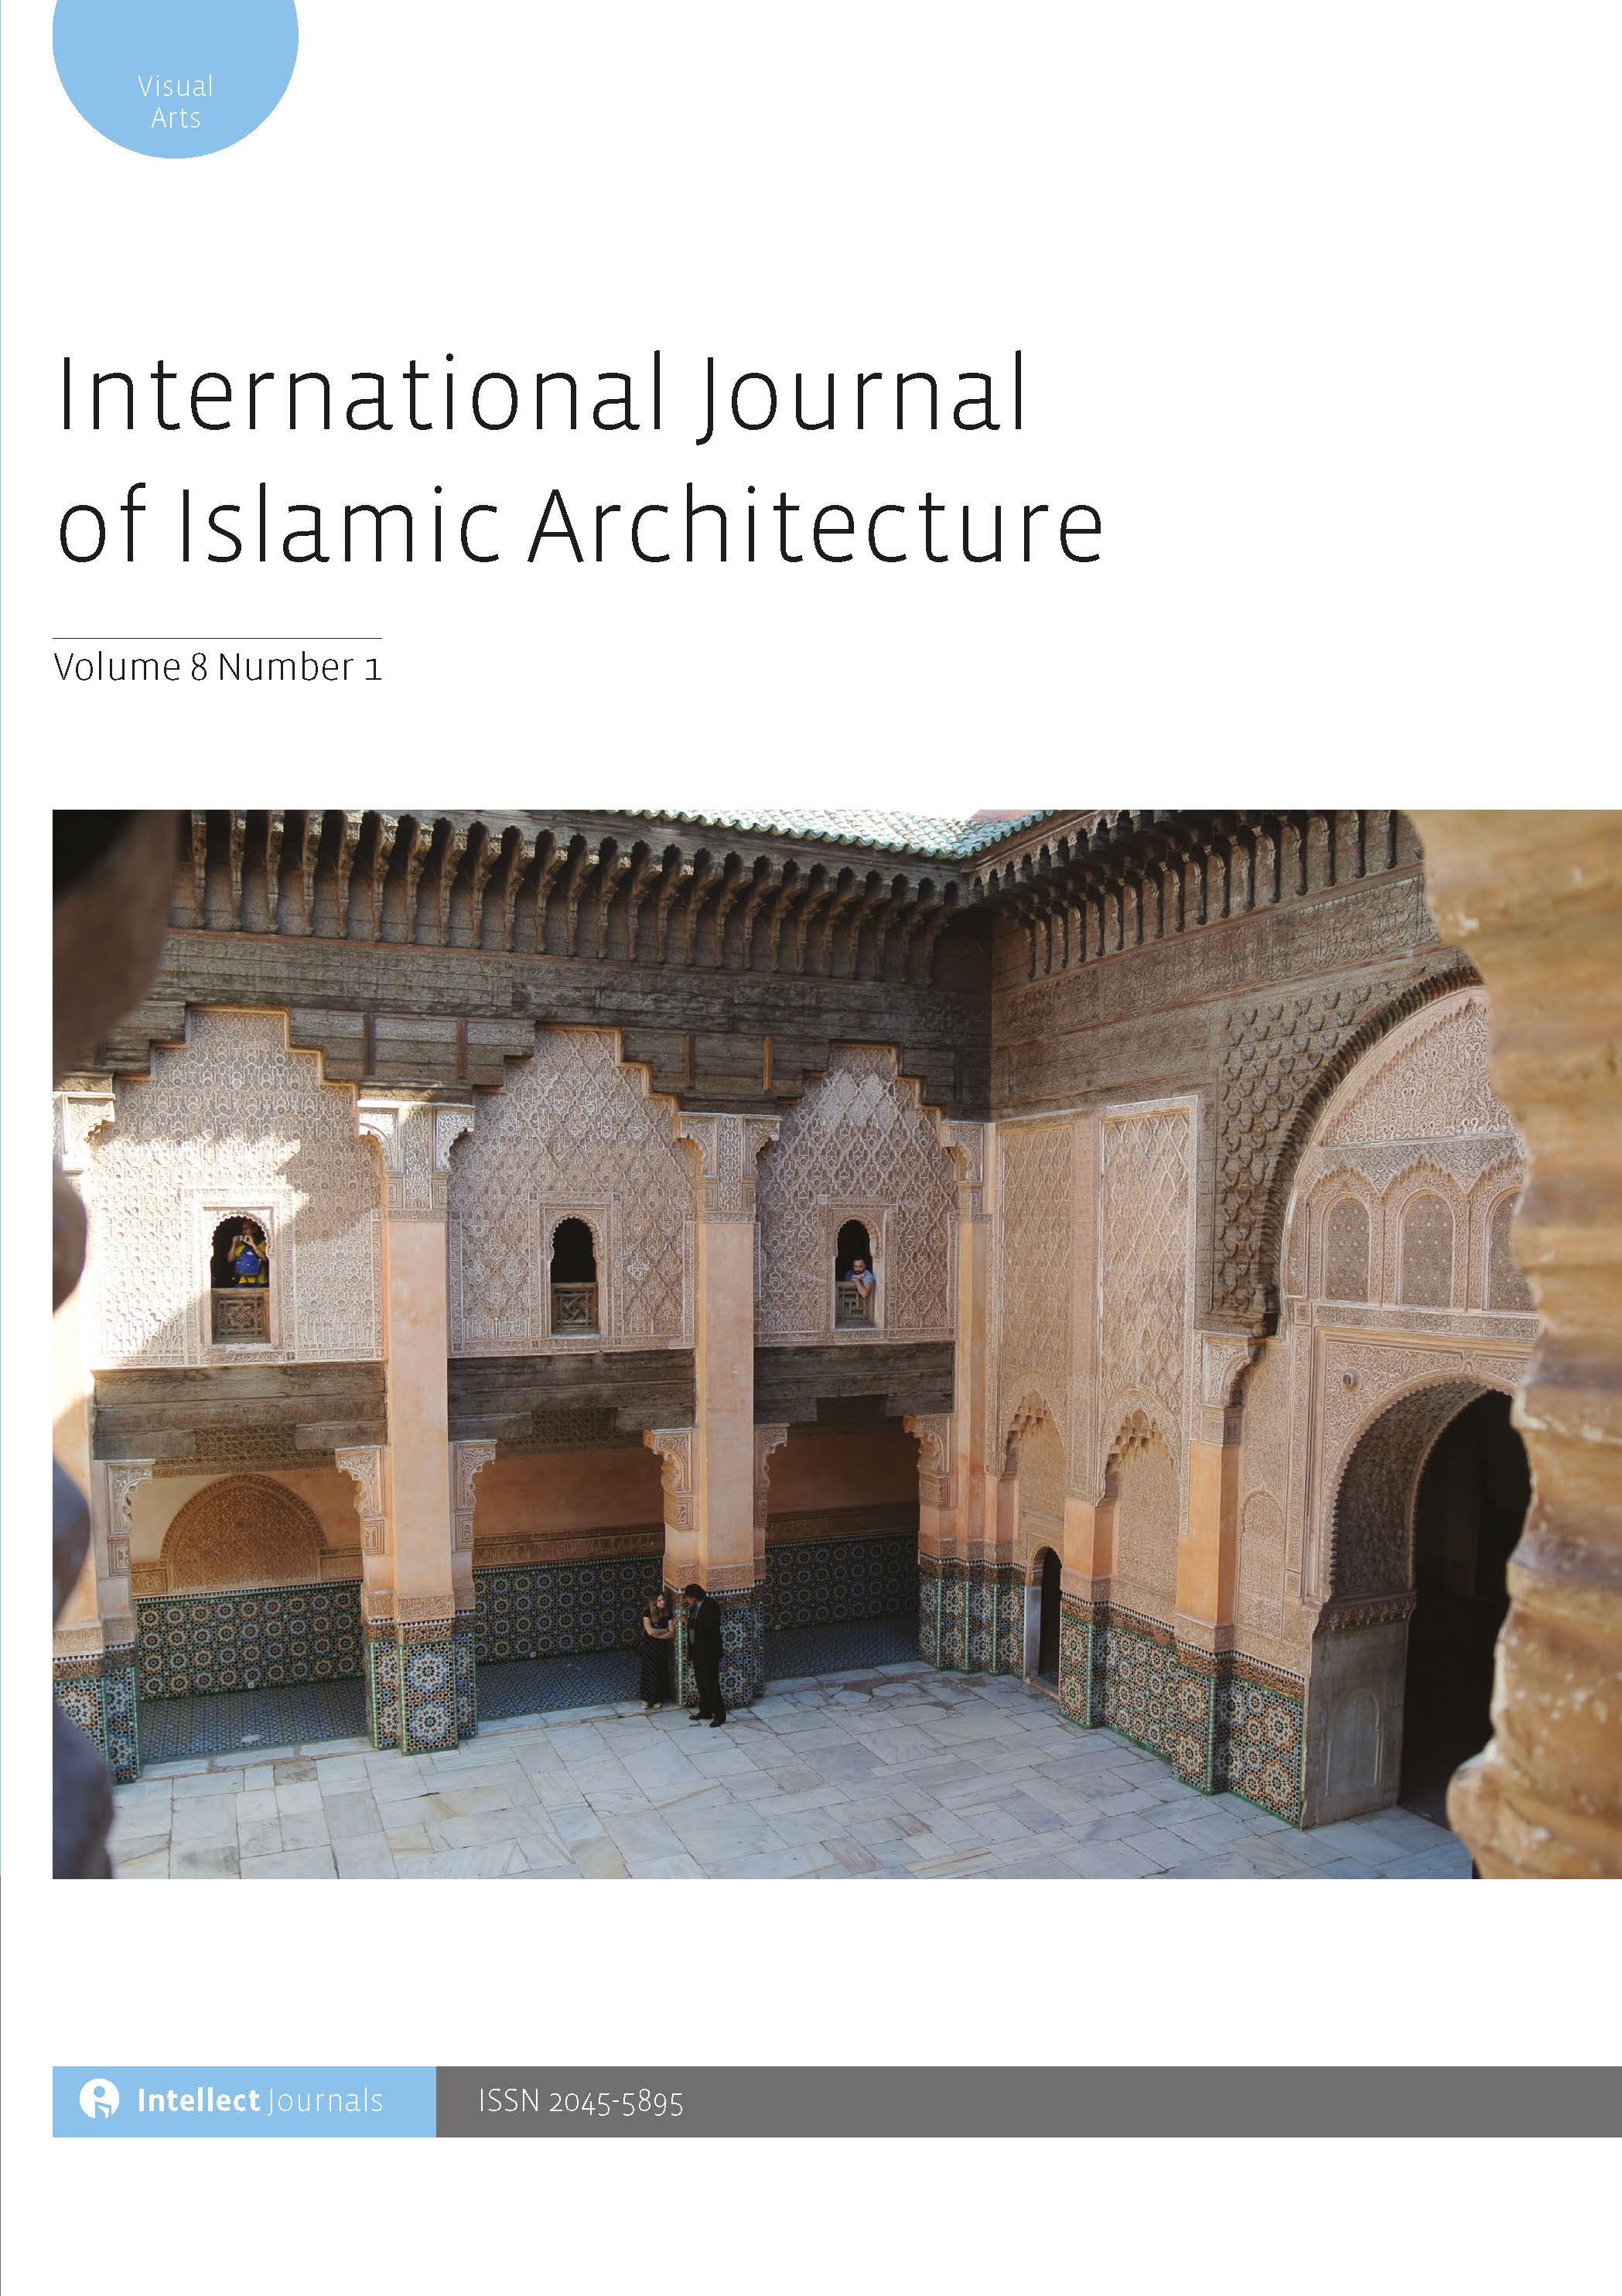 Architect-Designed Houses: From Traditional to Modern, a Changing Paradigm in the Islamic World